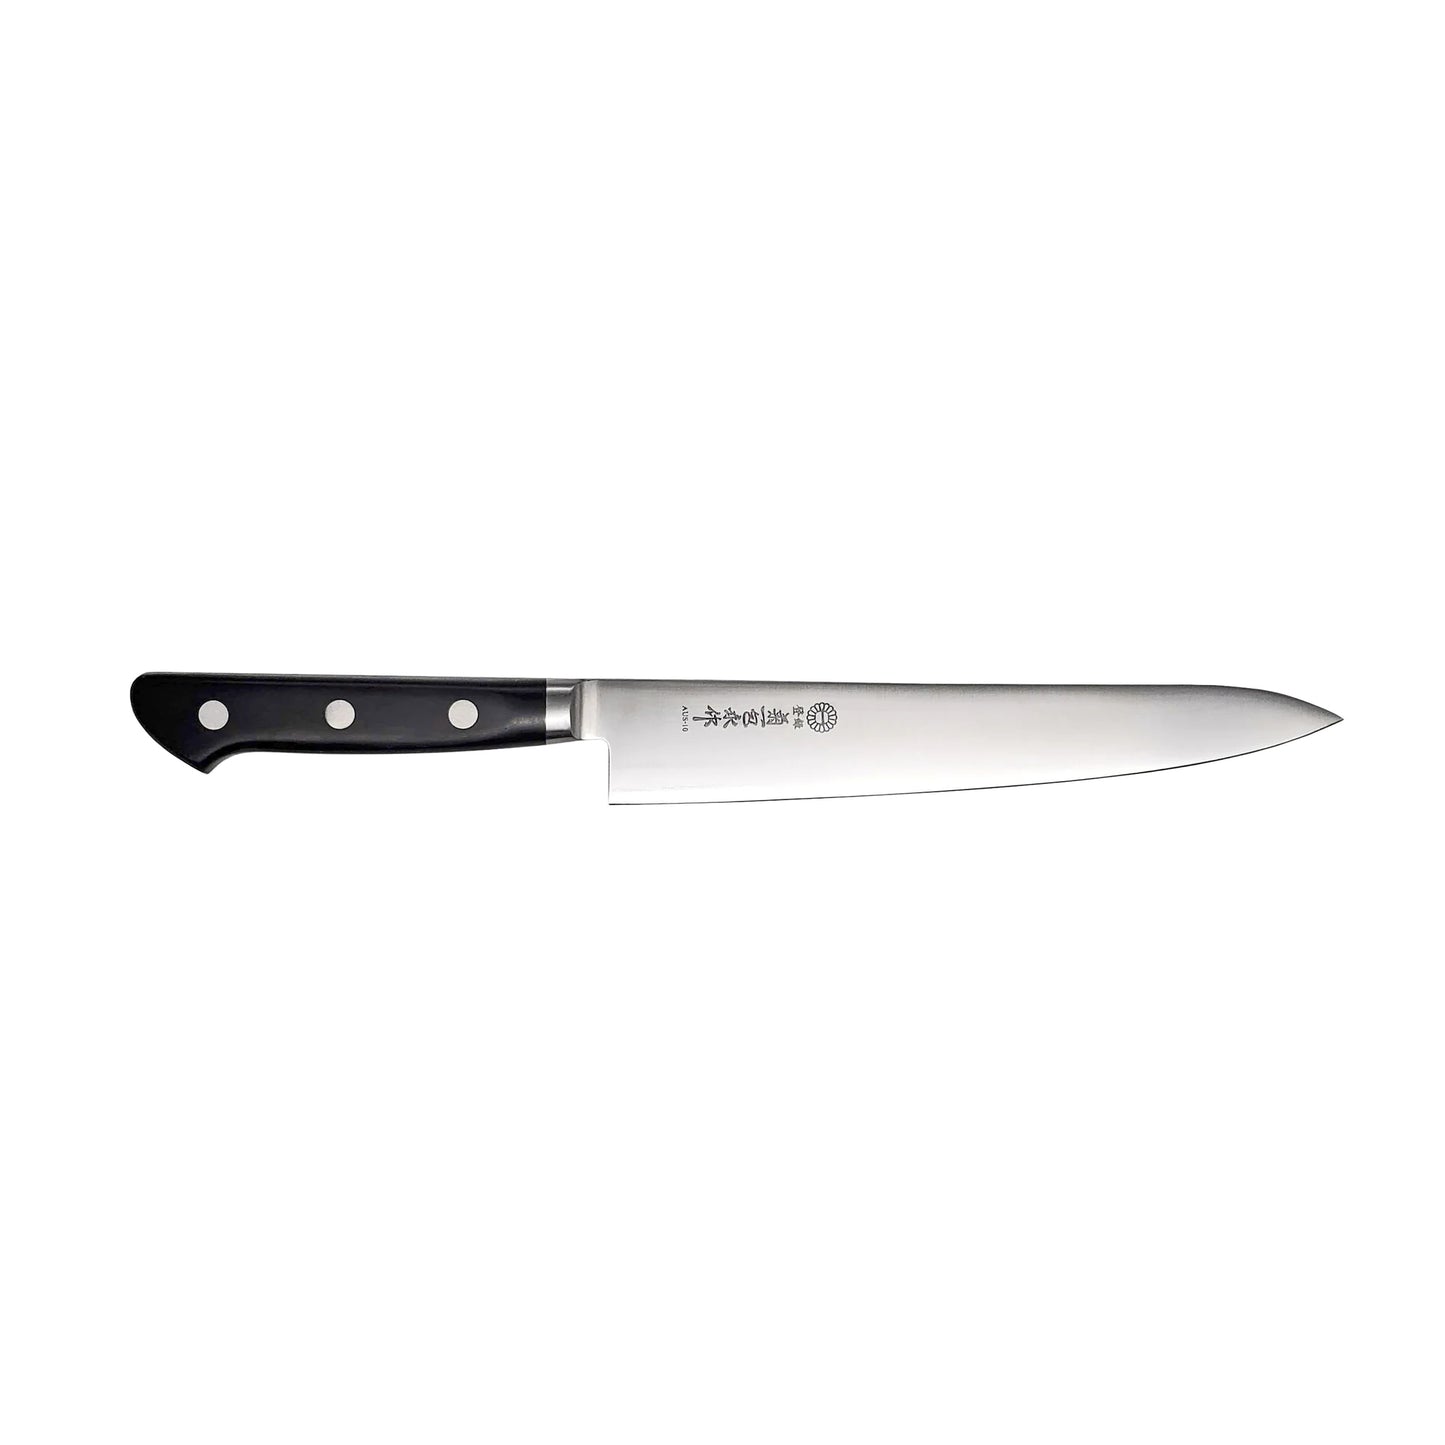 The GM Series Molybdenum Stainless Steel Petty knife offers excellent edge retention, sharpness, and ease of maintenance. Crafted by renowned Japanese cutlery brands with a long-standing tradition of excellence, these knives are the perfect companions for passionate cooking enthusiasts.